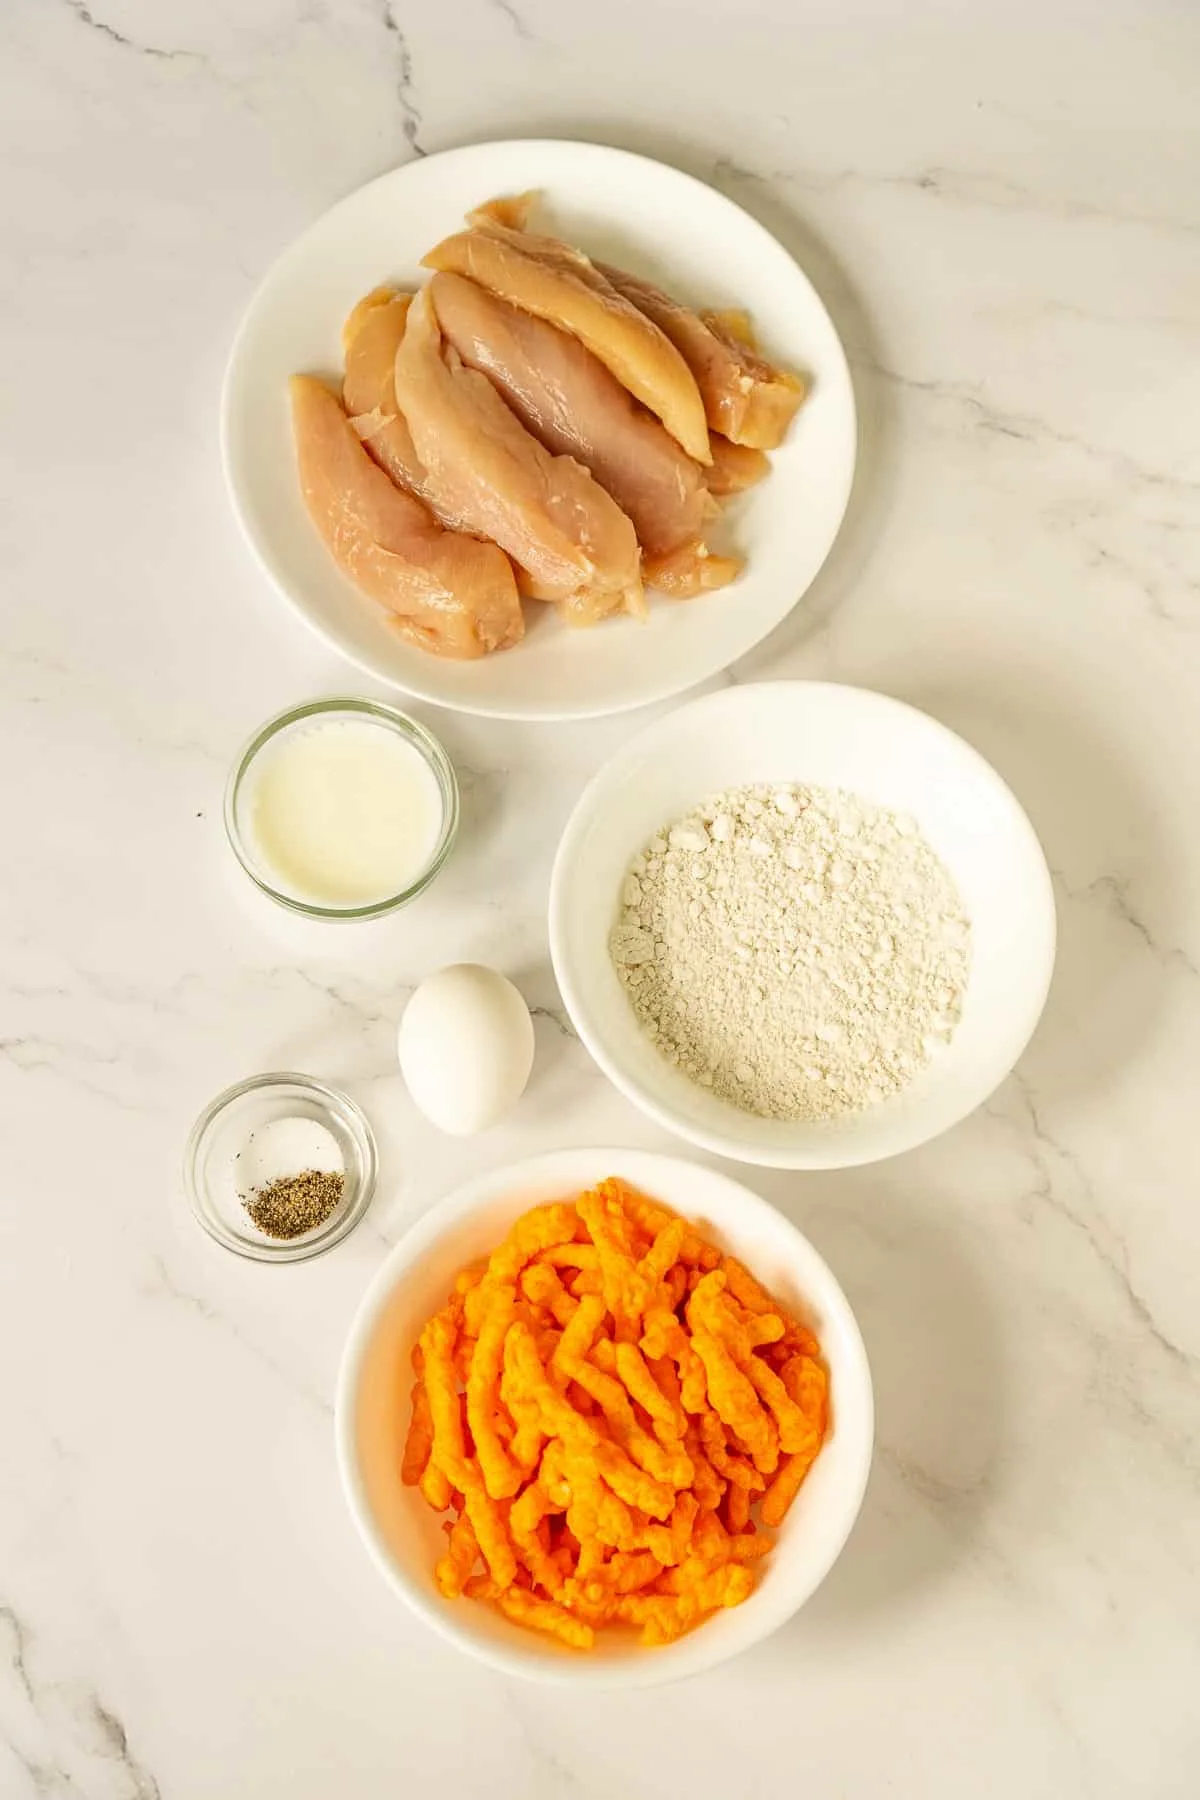 Ingredients for Cheetos crusted chicken tenders